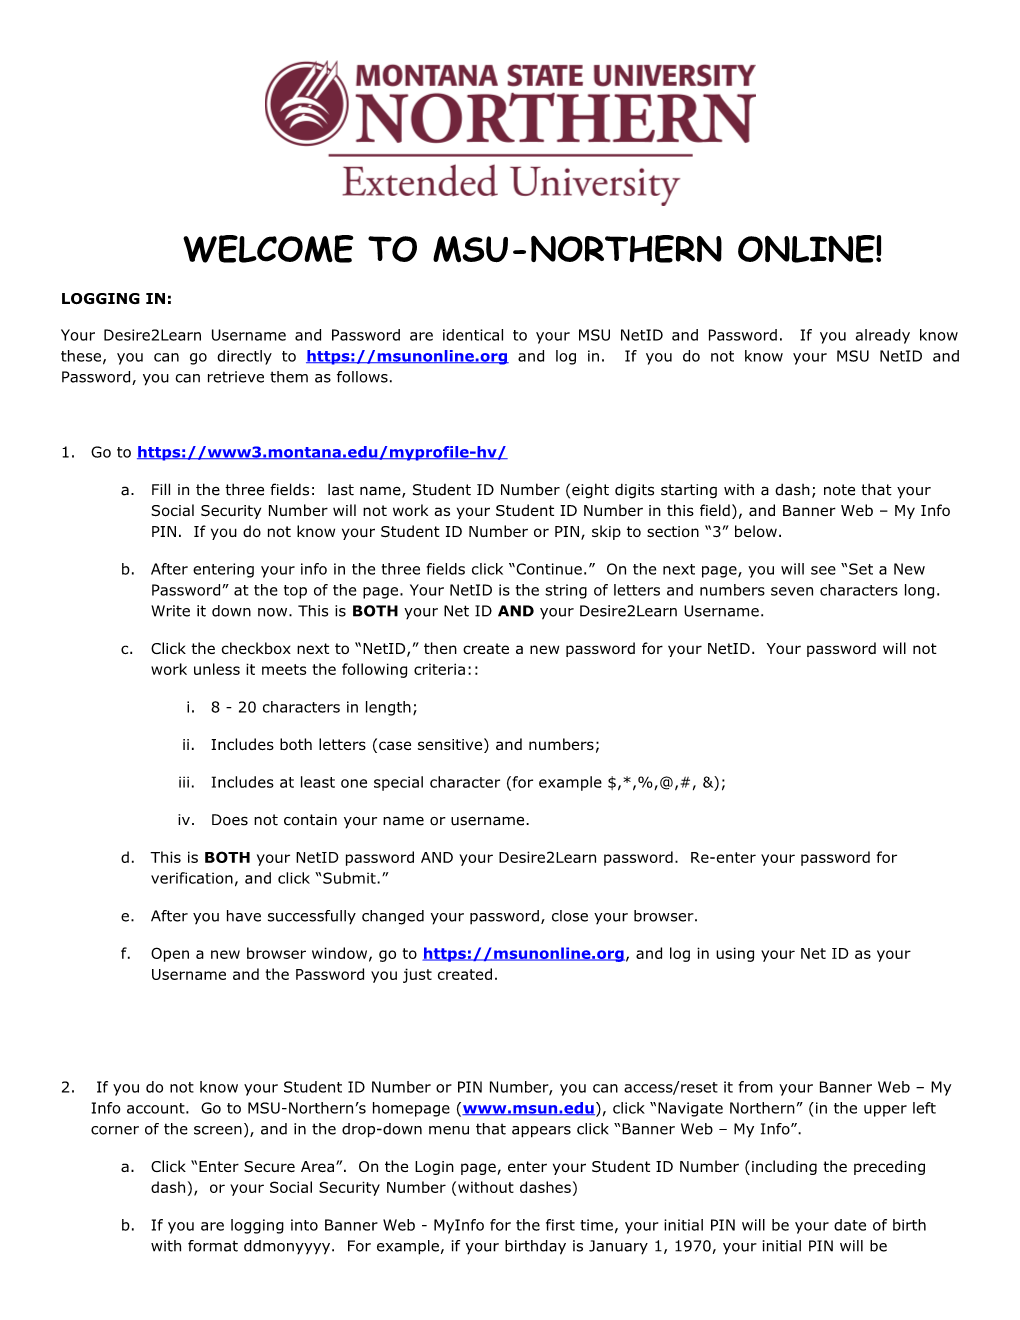 Welcome to Msu-Northern Online